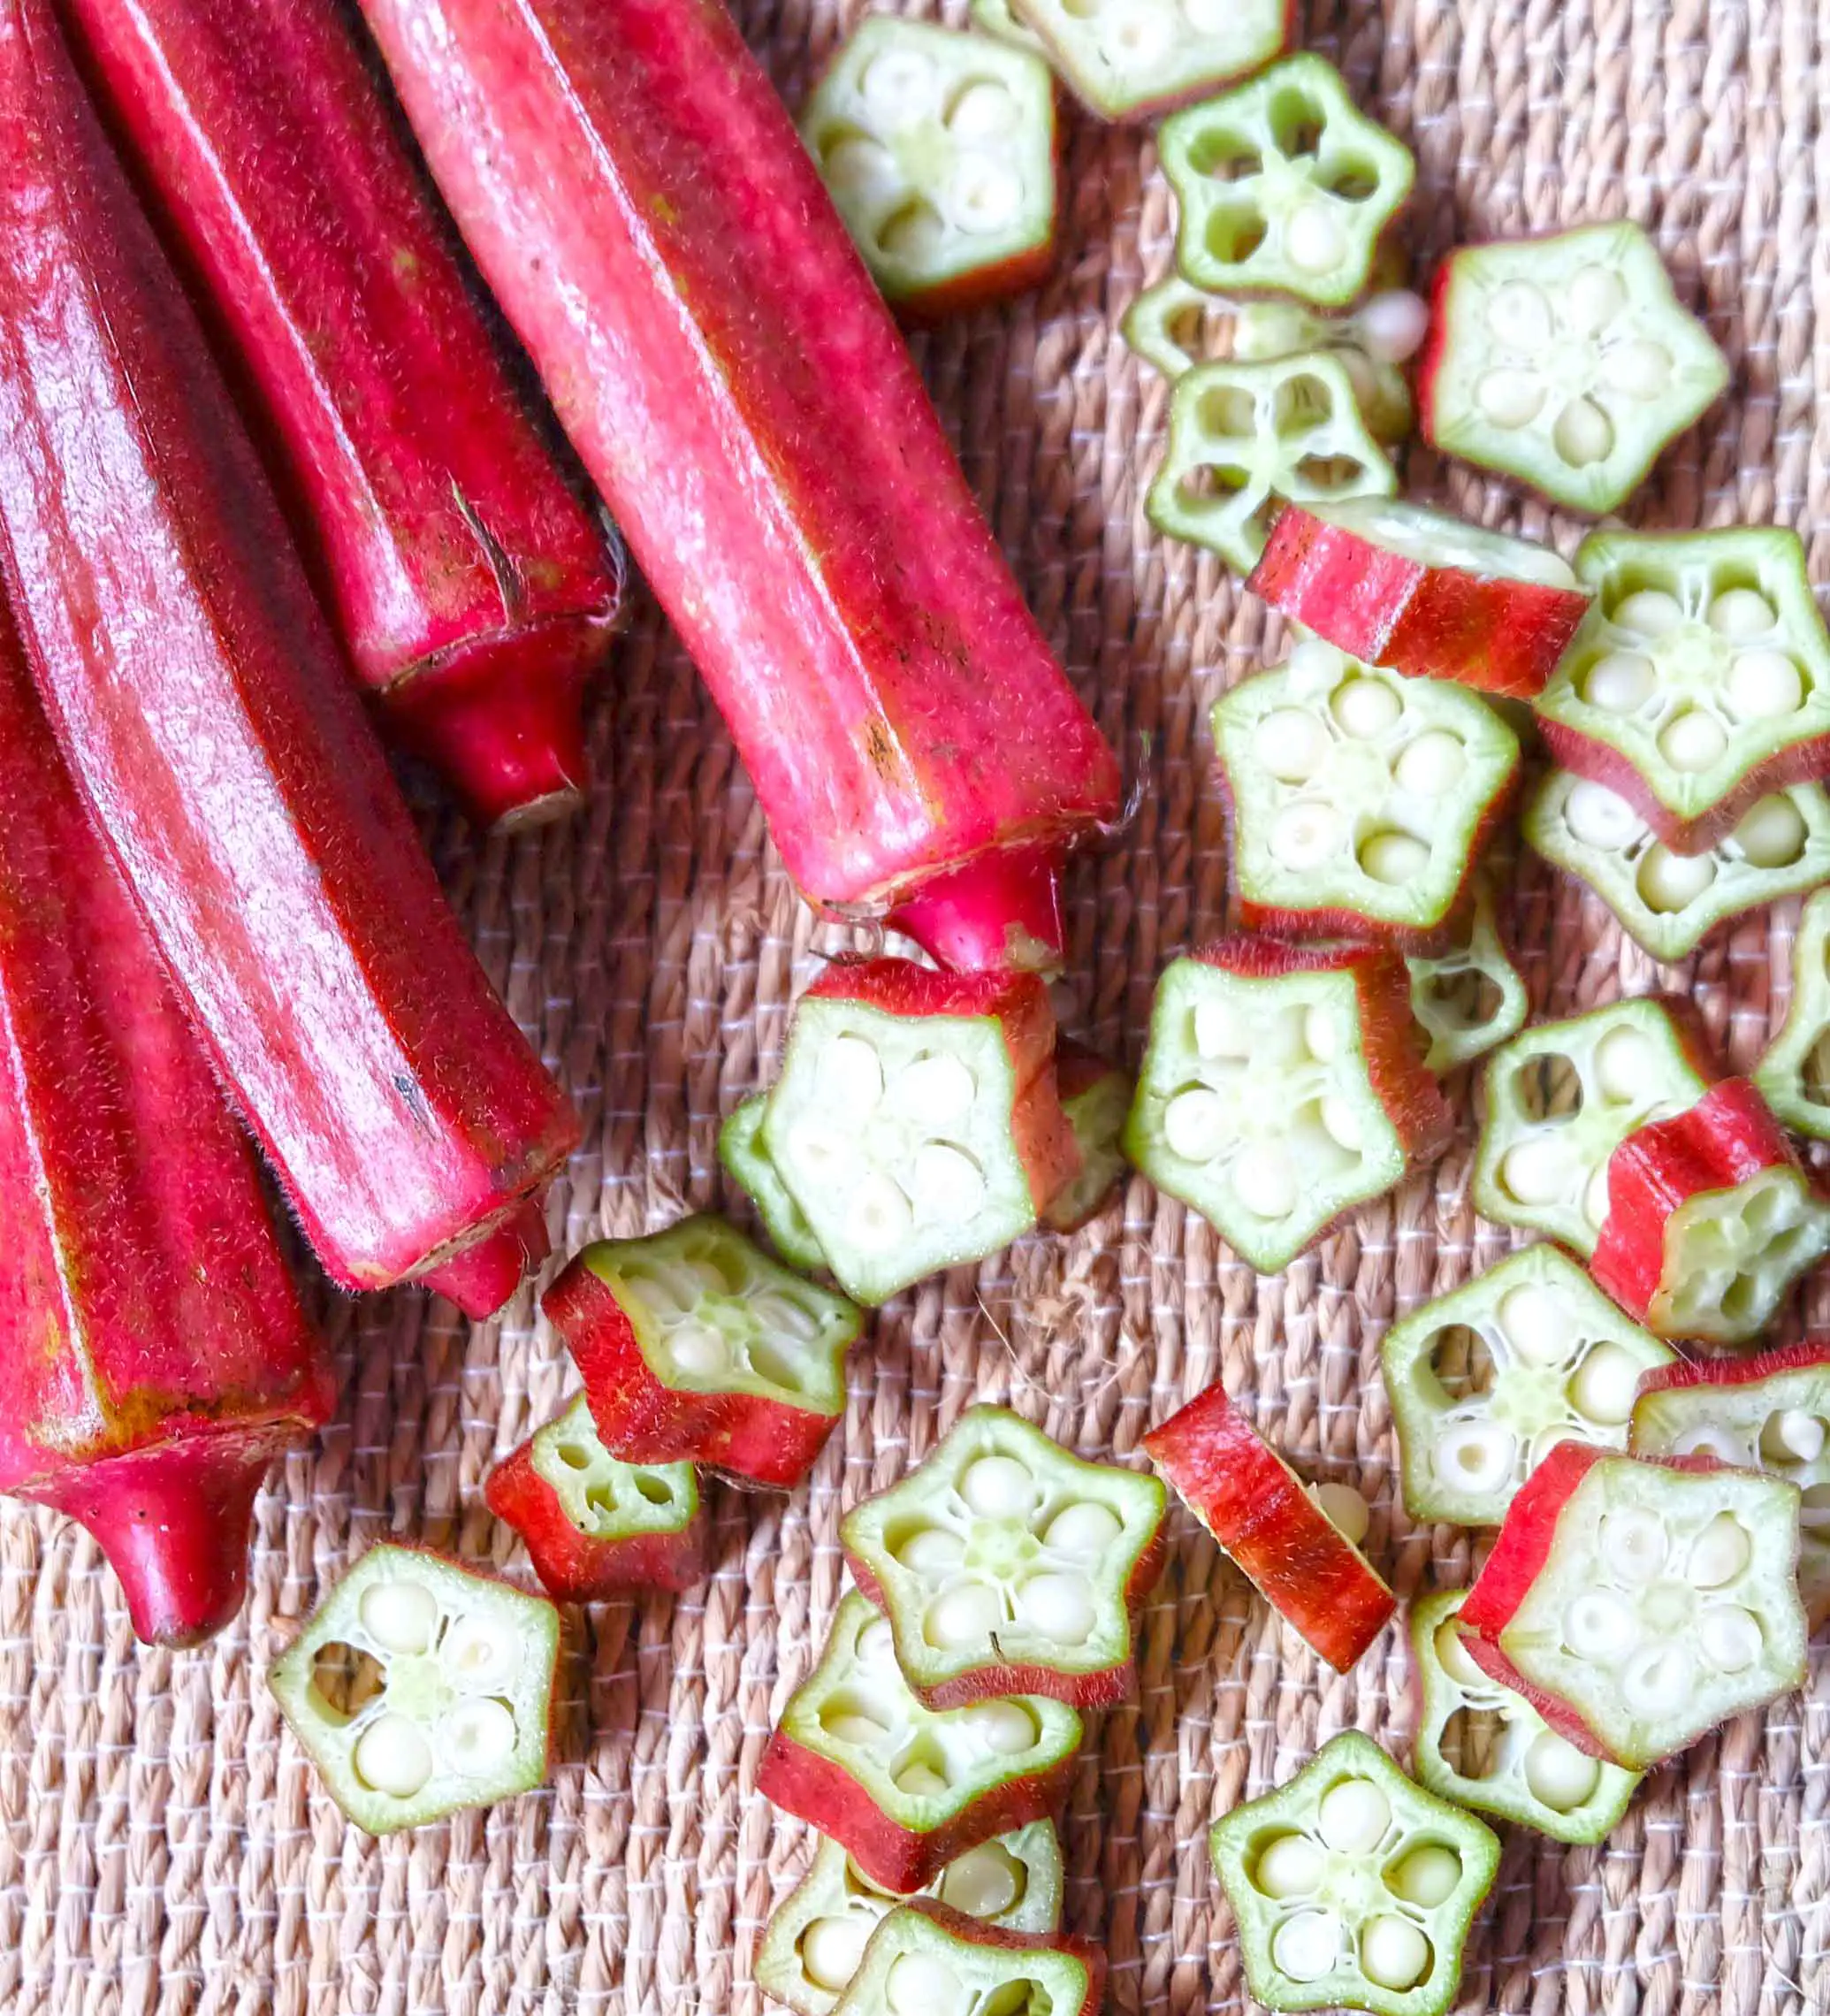 Red okra pods and slices